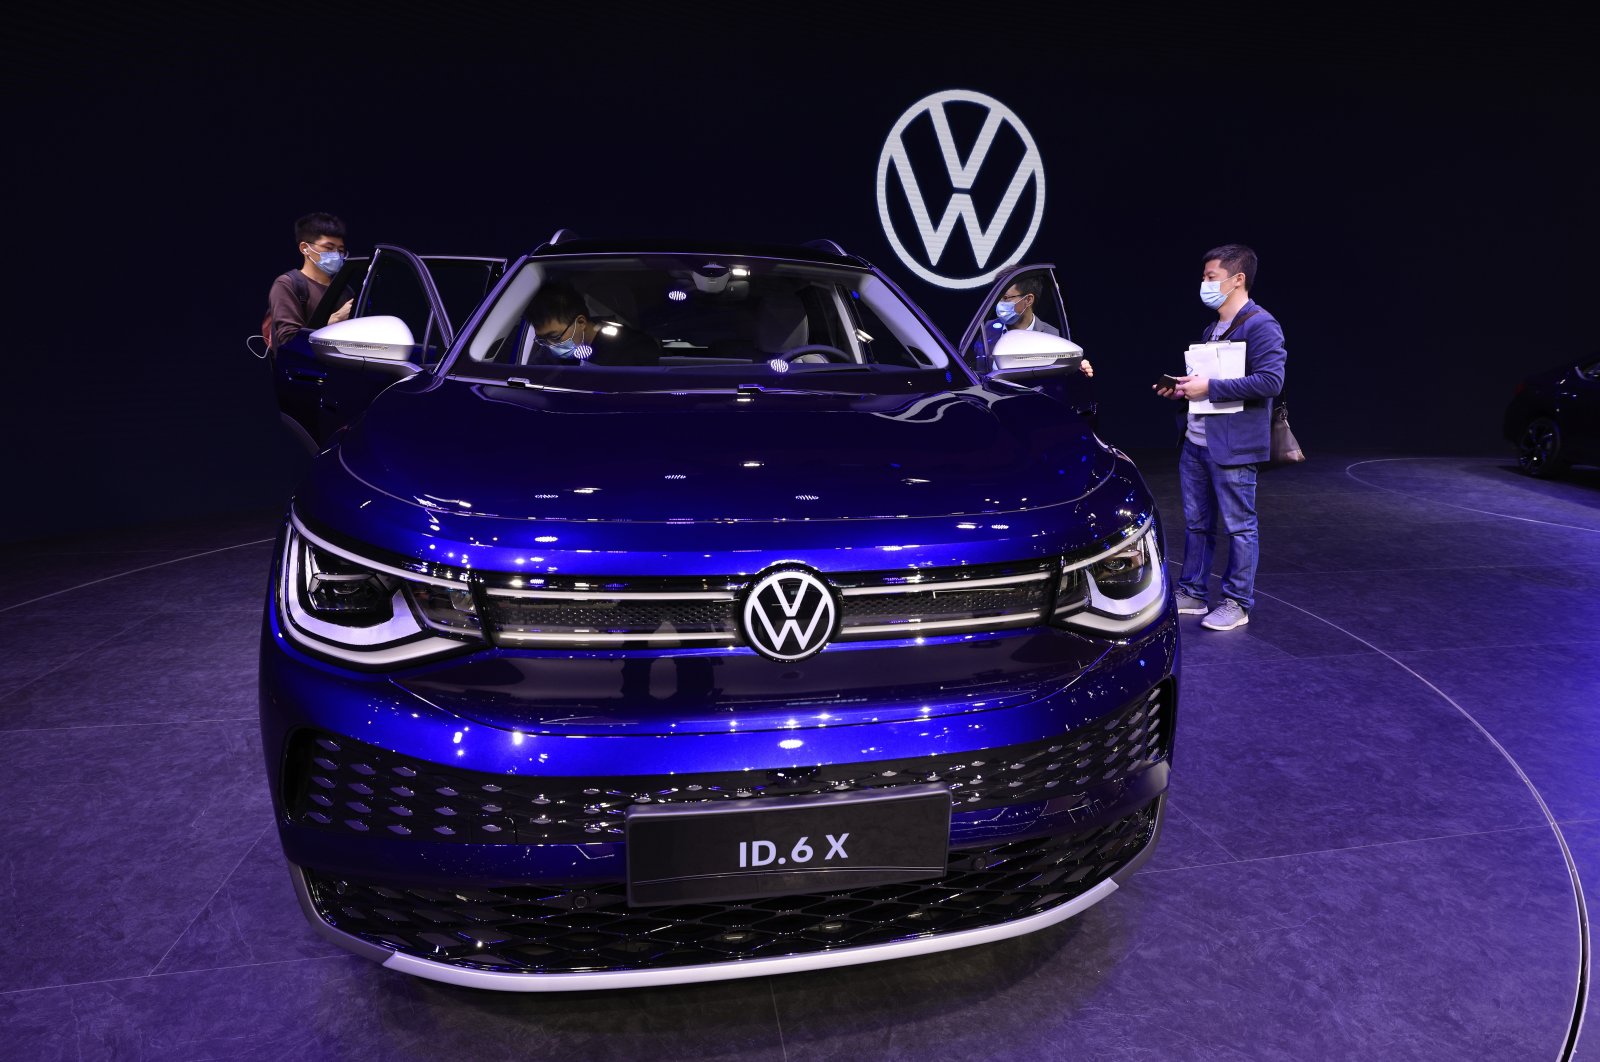 VW Q1 profit jumps, yet impact of global chip shortage lingers Daily